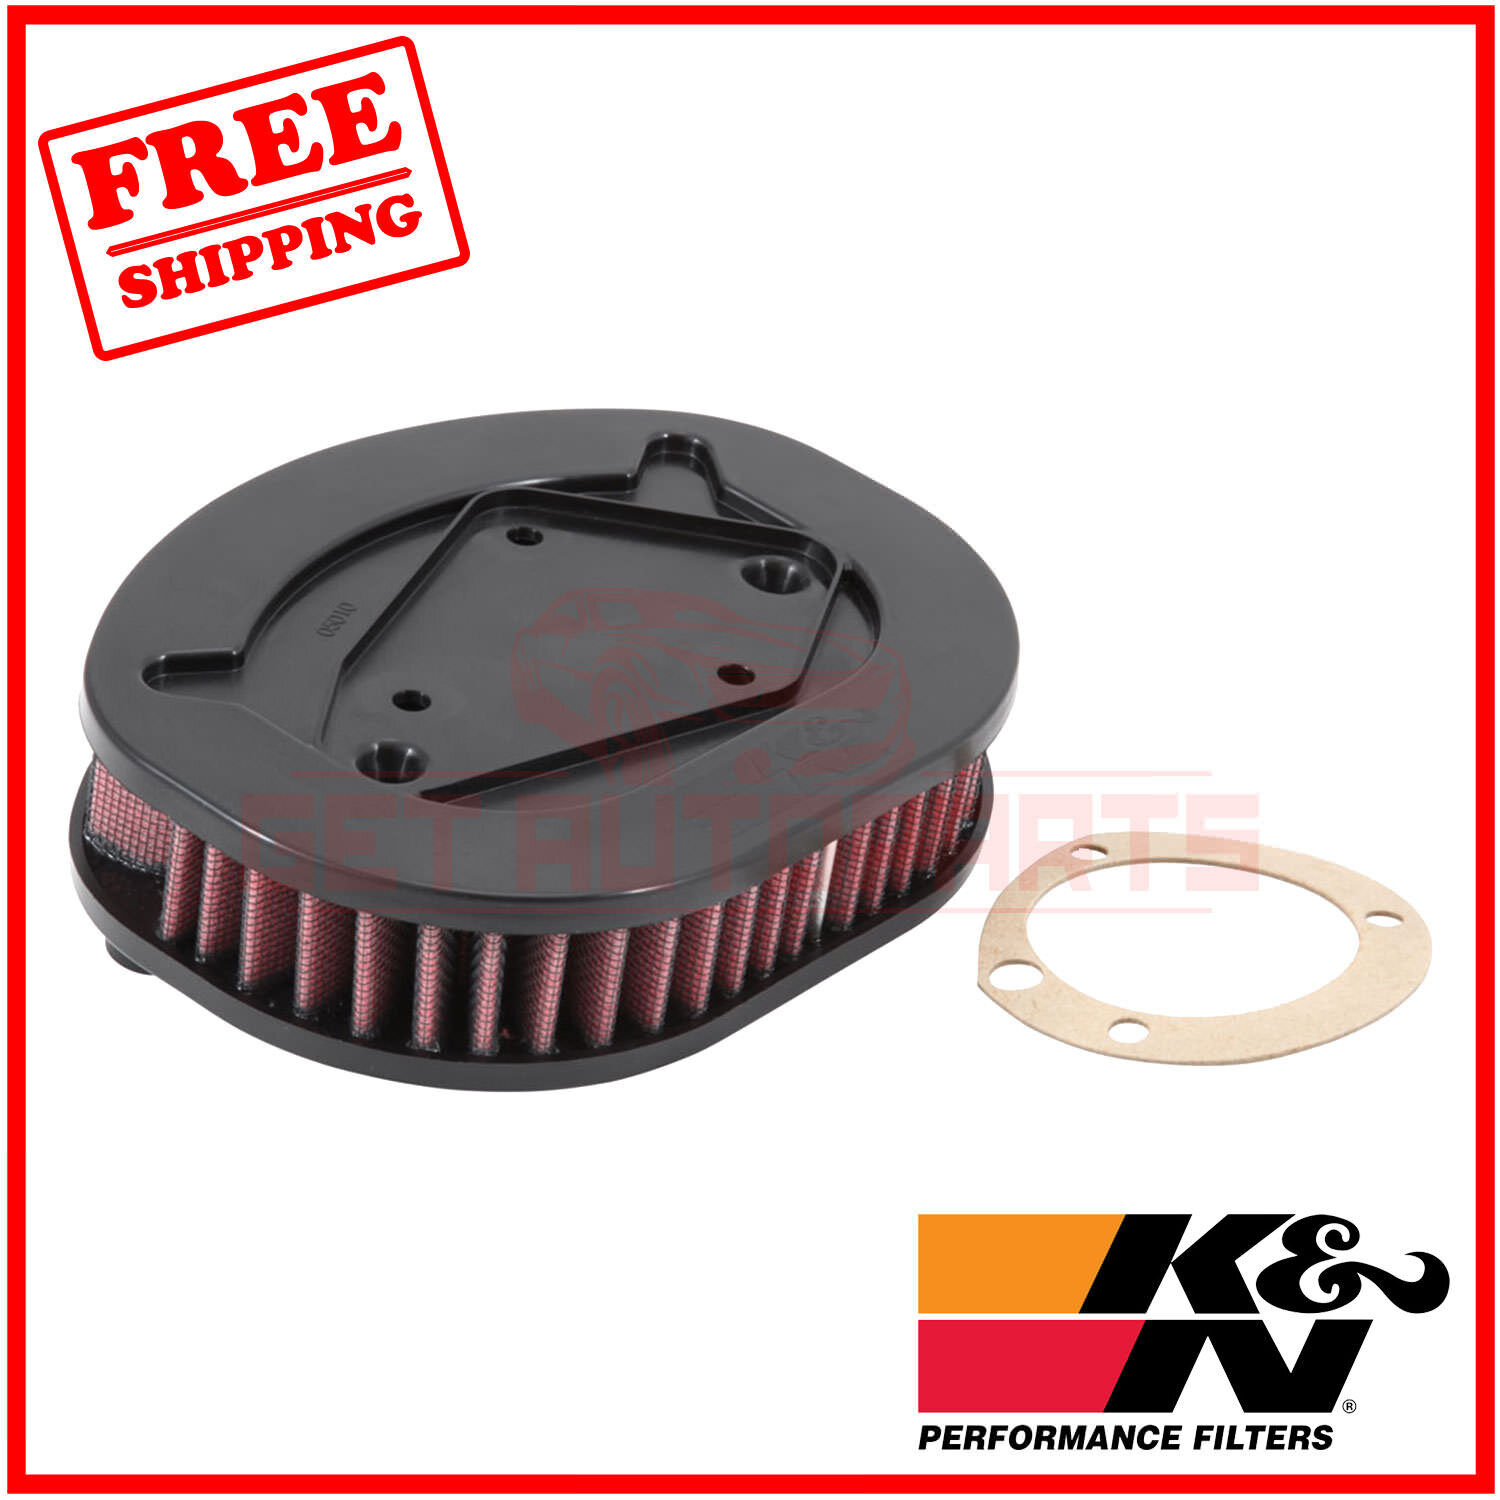 K&N Replacement Air Filter for Harley Davidson XL1200CX Roadster 2016-2019